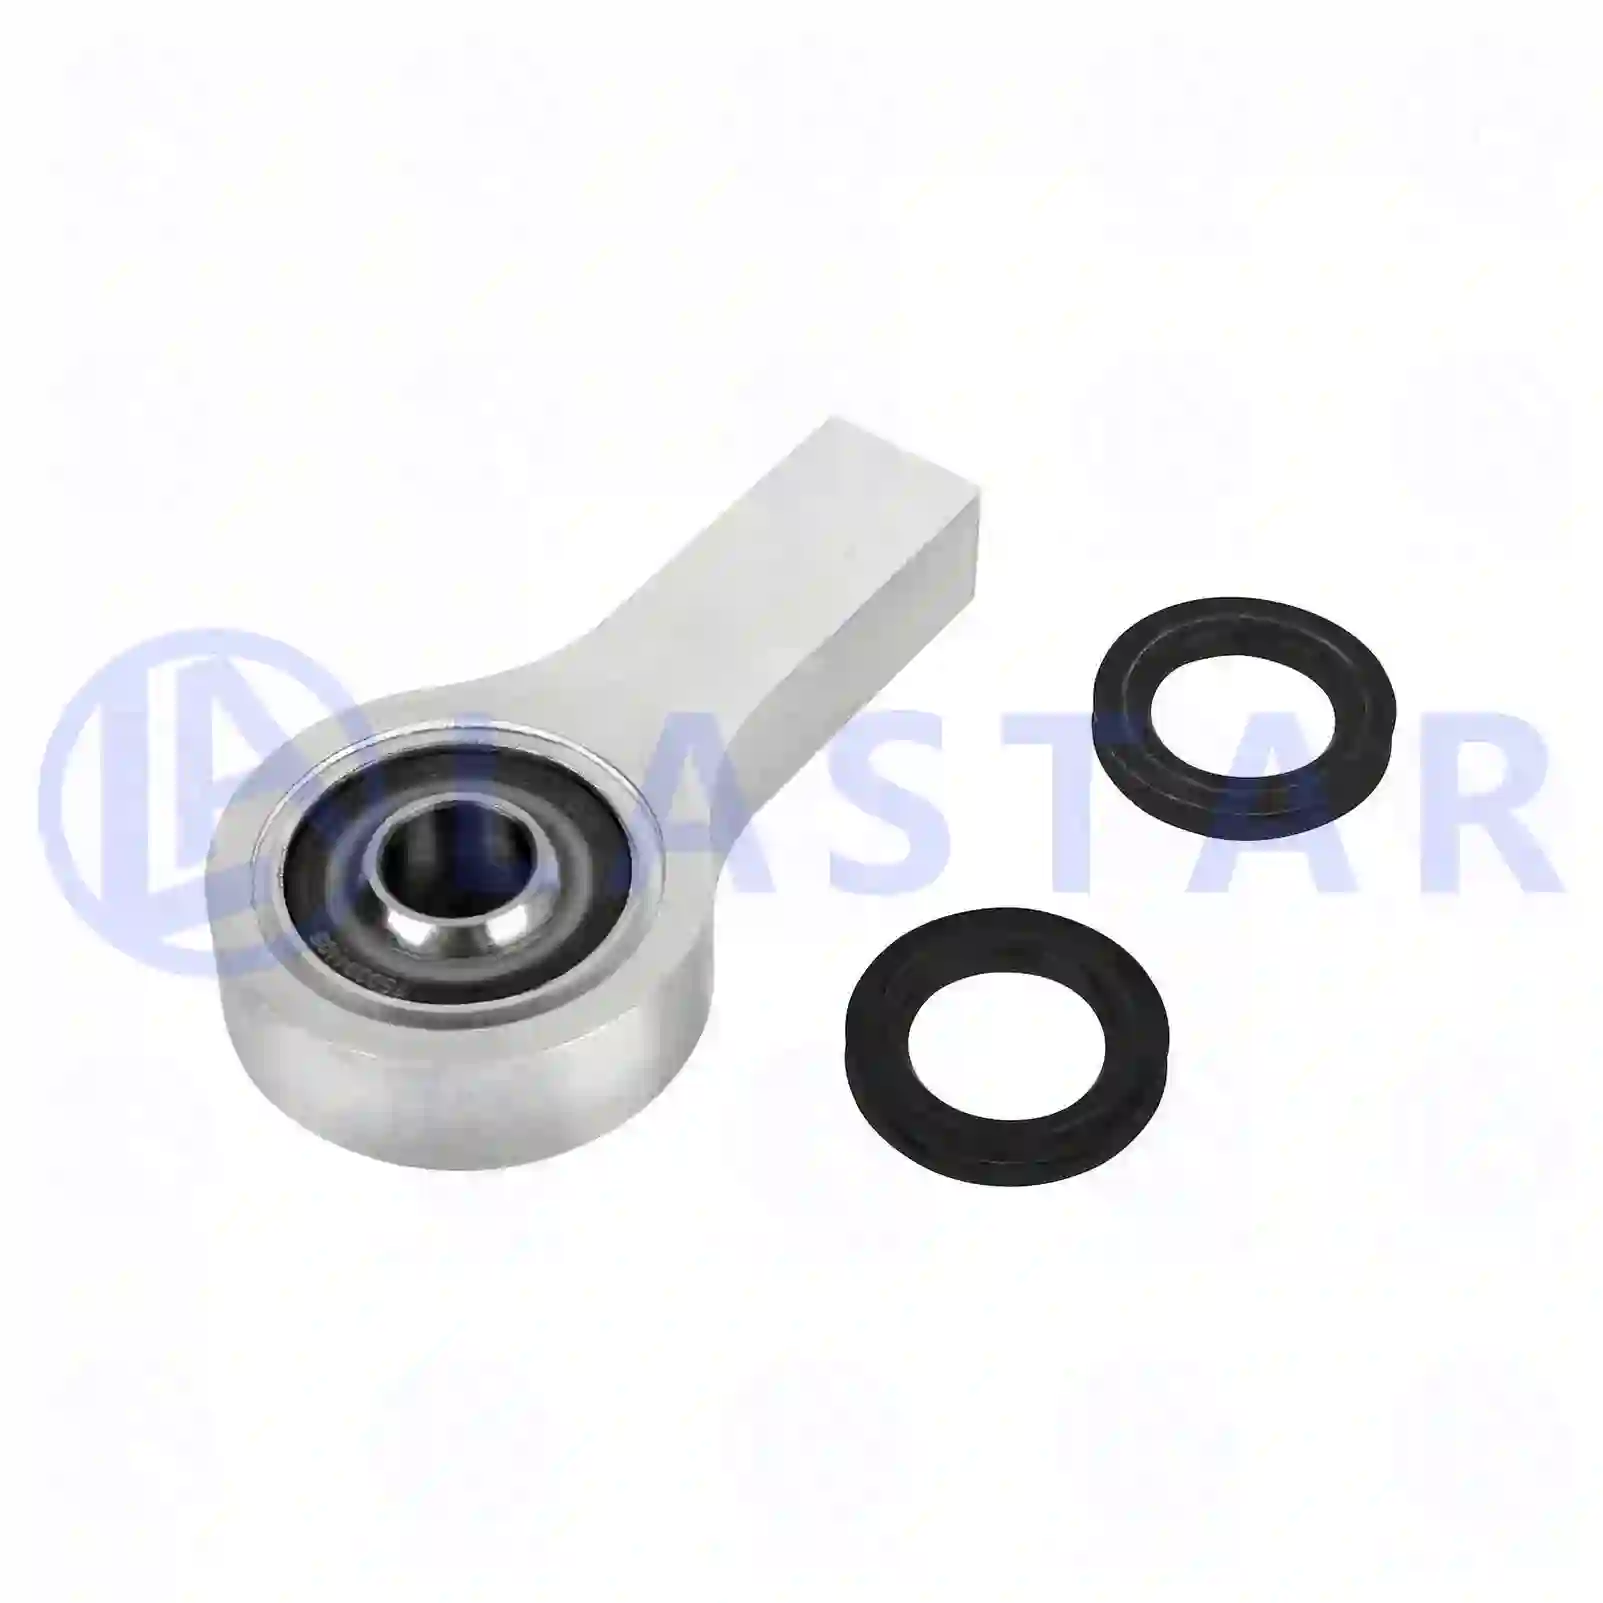 Bearing joint, complete with seal rings, 77736101, 2171714, ZG40857-0008, , ||  77736101 Lastar Spare Part | Truck Spare Parts, Auotomotive Spare Parts Bearing joint, complete with seal rings, 77736101, 2171714, ZG40857-0008, , ||  77736101 Lastar Spare Part | Truck Spare Parts, Auotomotive Spare Parts